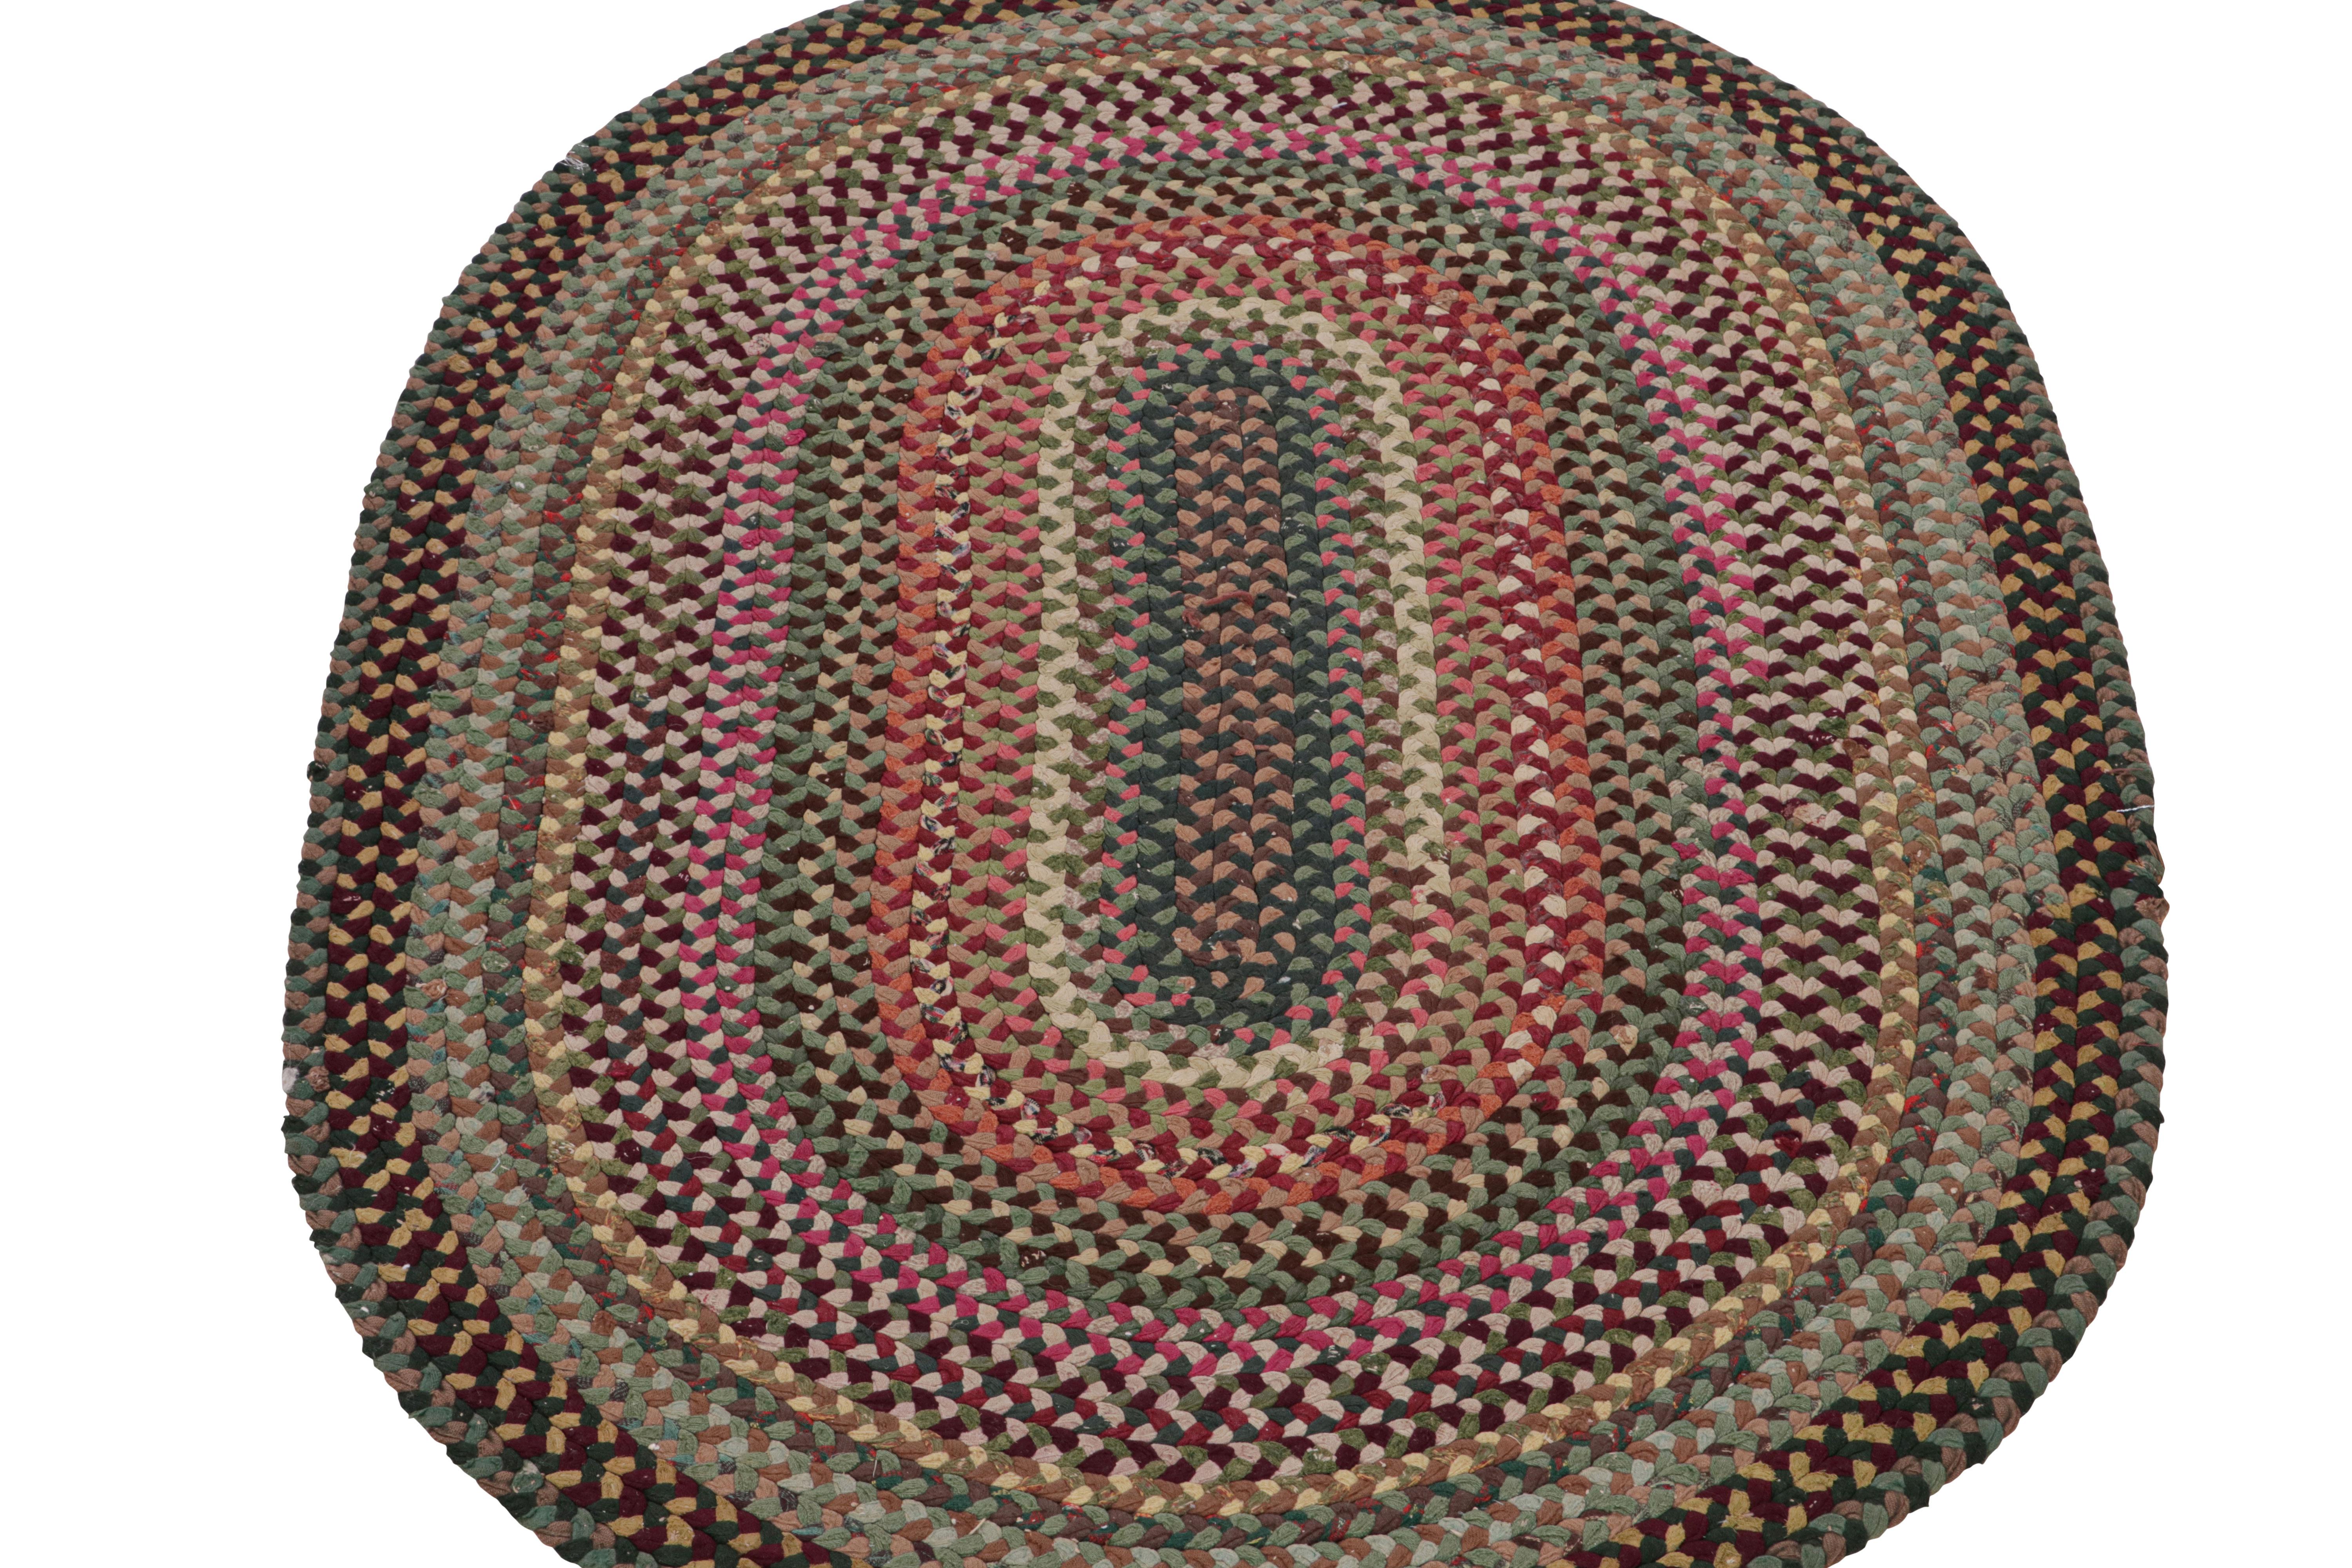 American Antique Hooked Oval Rug with Polychromatic Braided Stripes, from Rug & Kilim For Sale